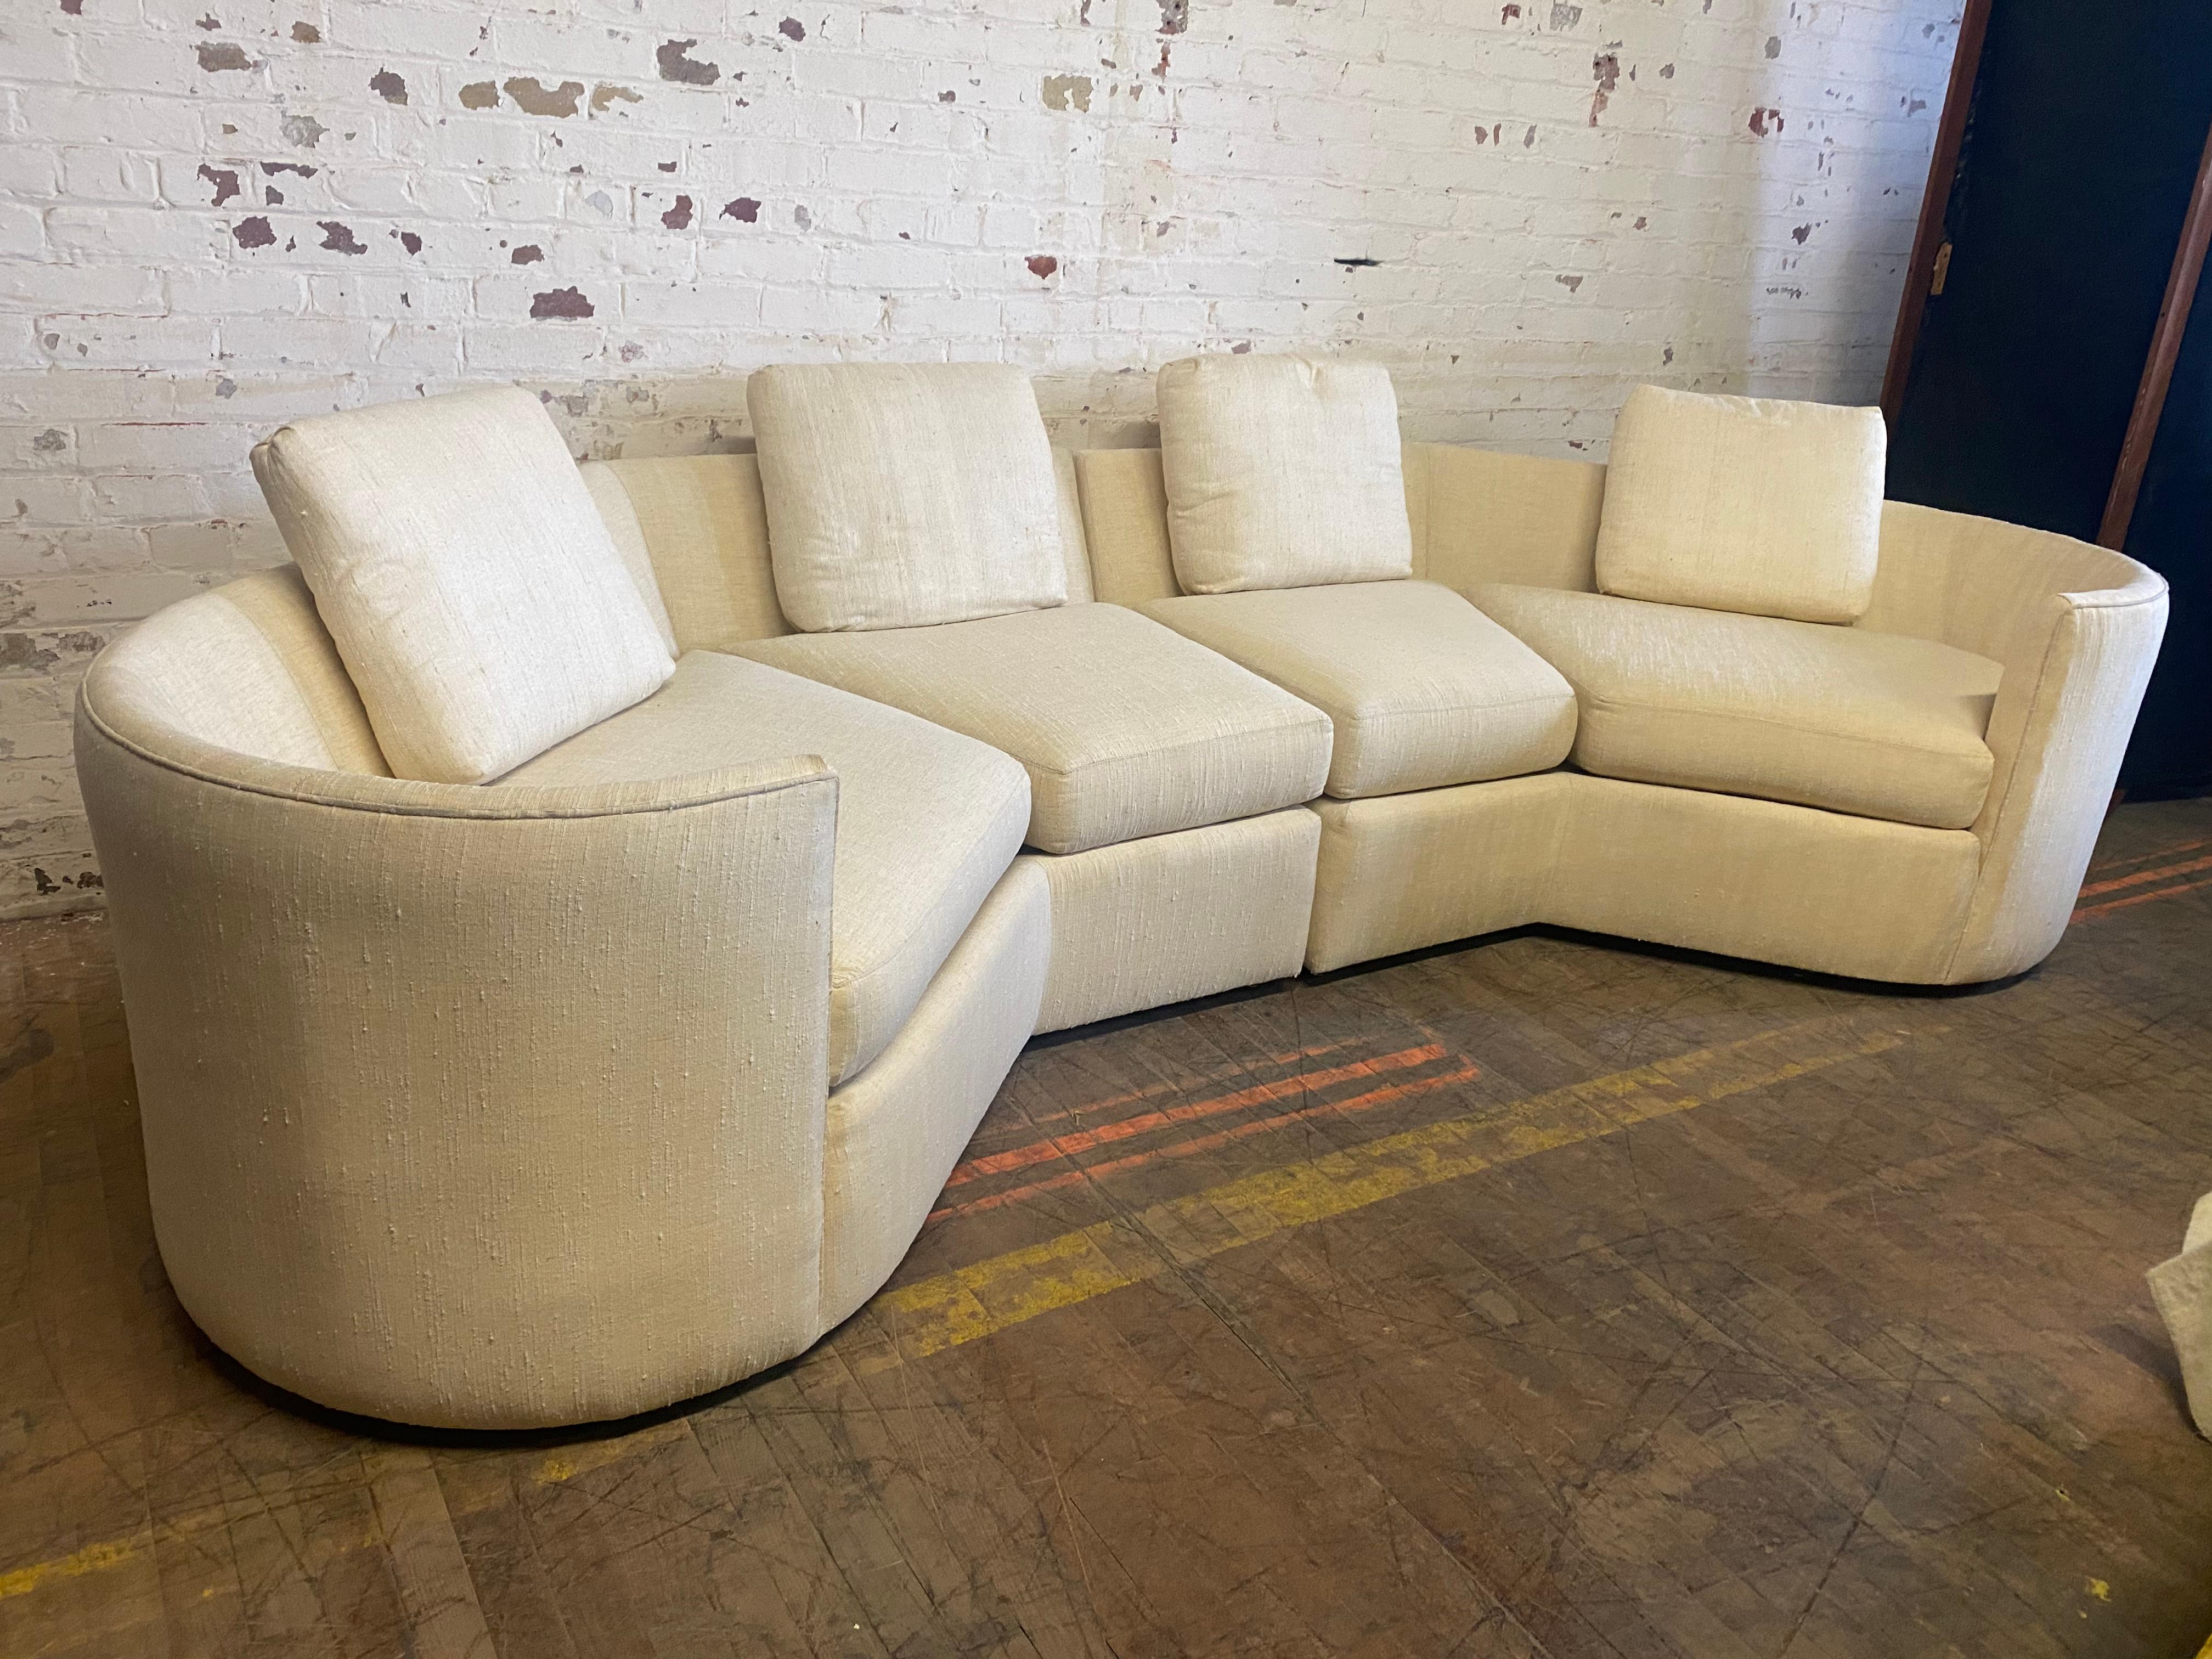 Late 20th Century Post Modernist Two-Piece Contemporary Sofa by Charak Furniture Co. For Sale